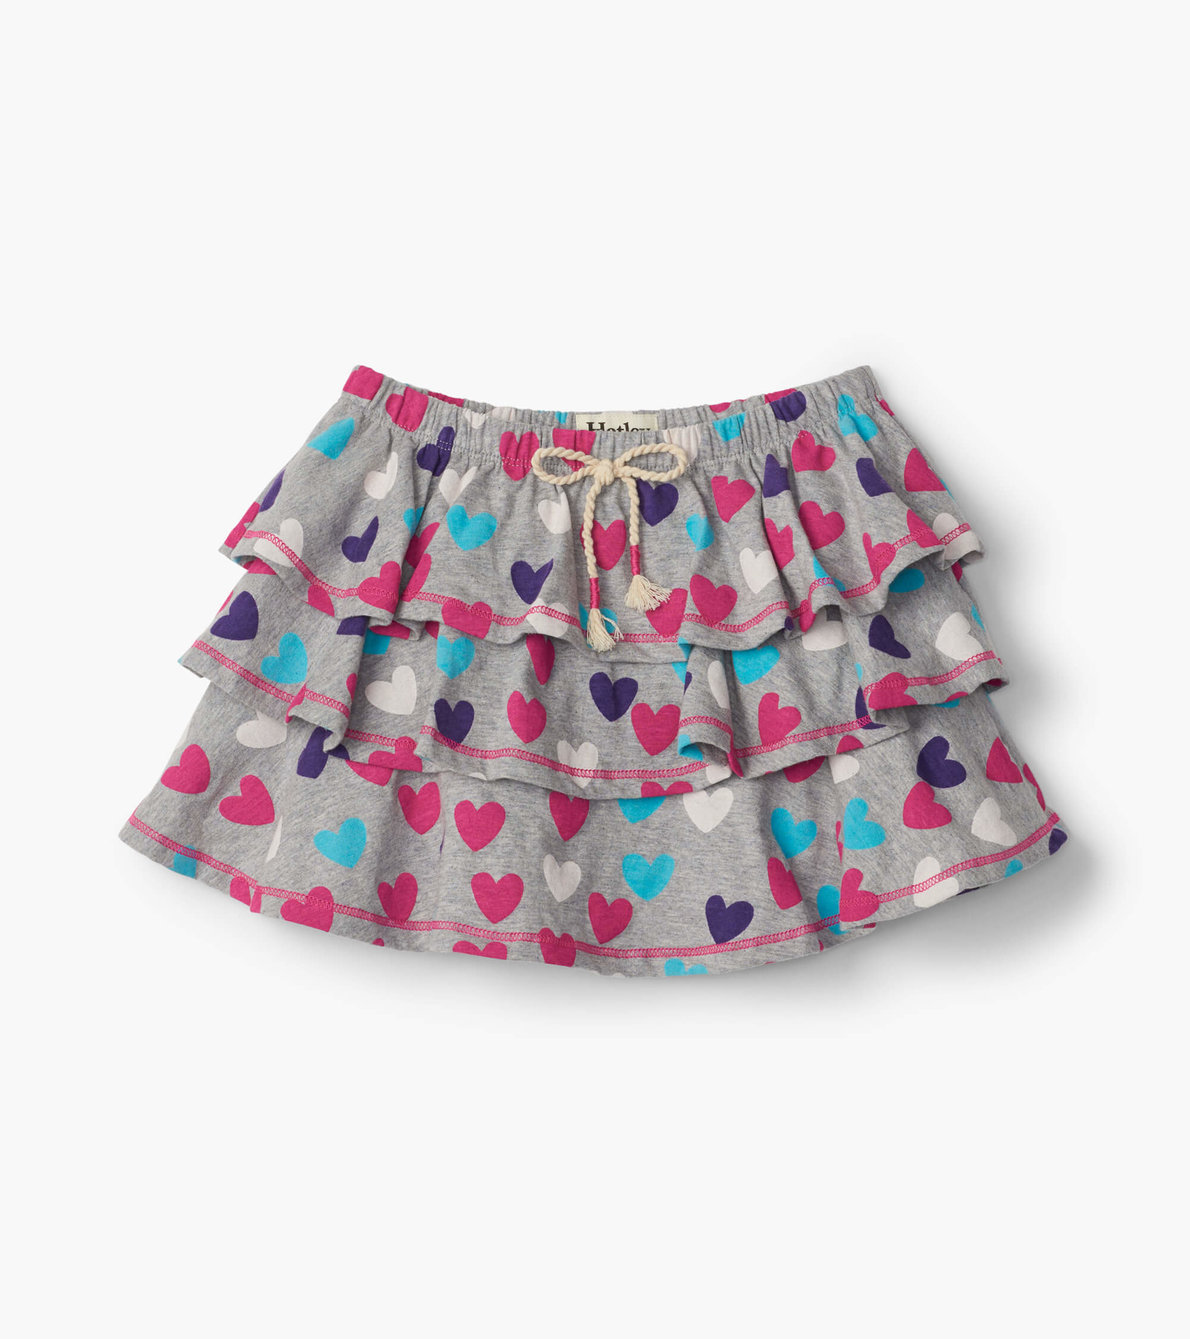 View larger image of Multicolour Hearts Ruffle Skirt